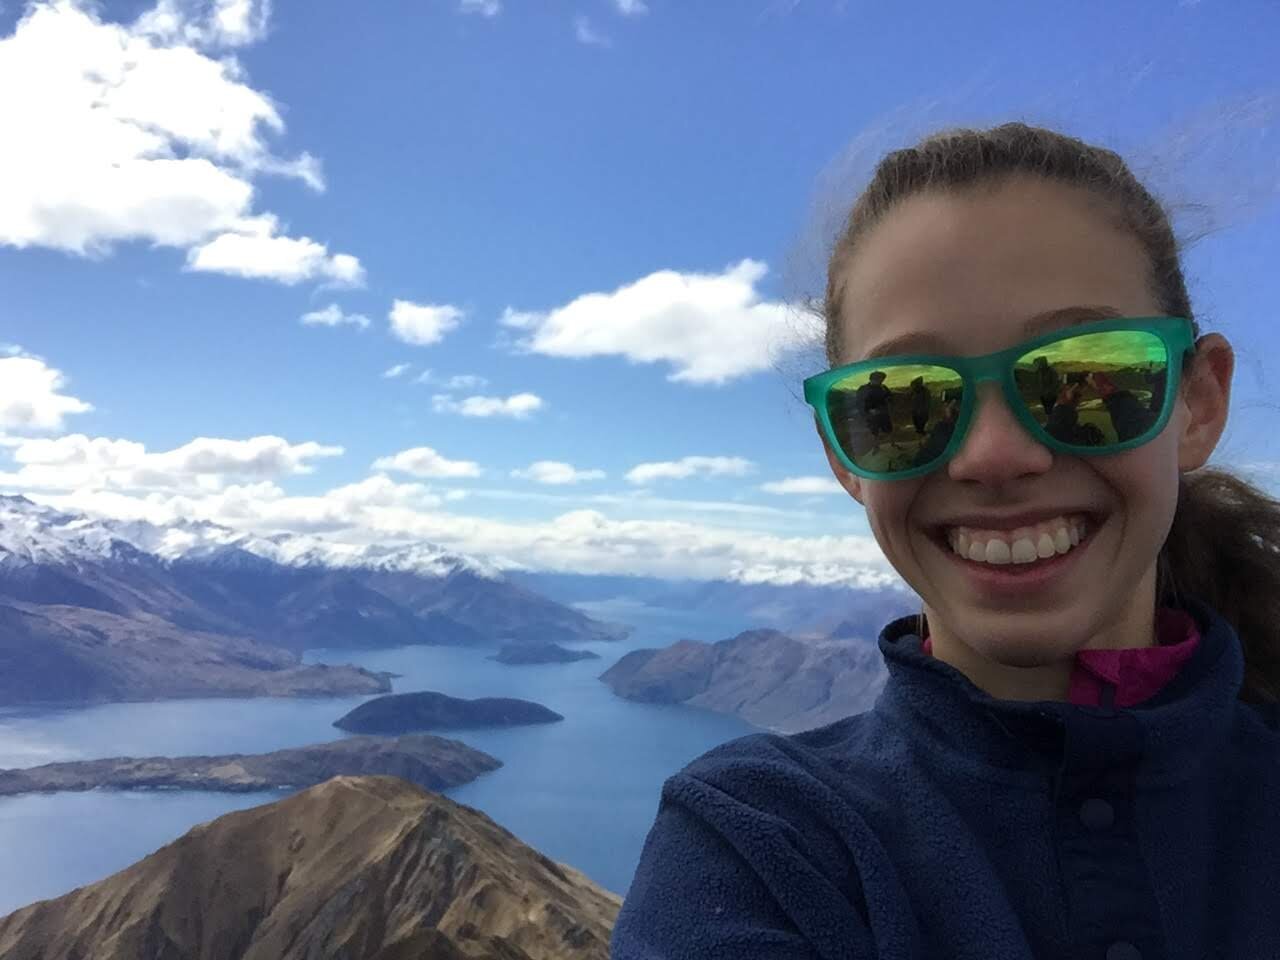 Me with End of Lake Wanaka in Distance